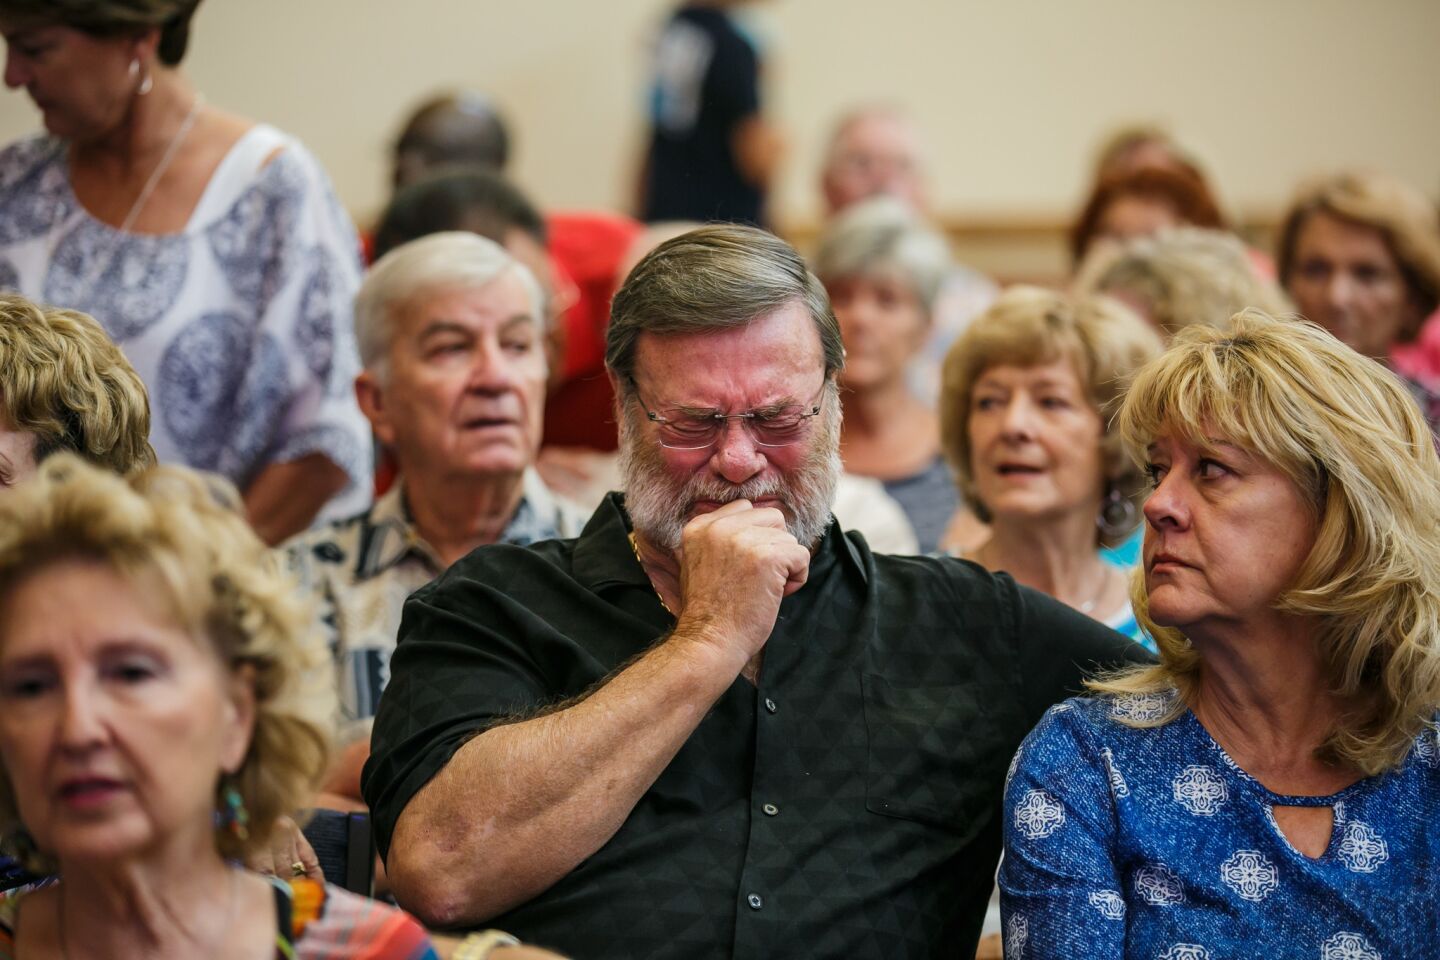 Wayne Christopher, center, weeps as his wife, Helen, looks on during a Sunday service at First United Methodist Church in Dickinson, Texas.